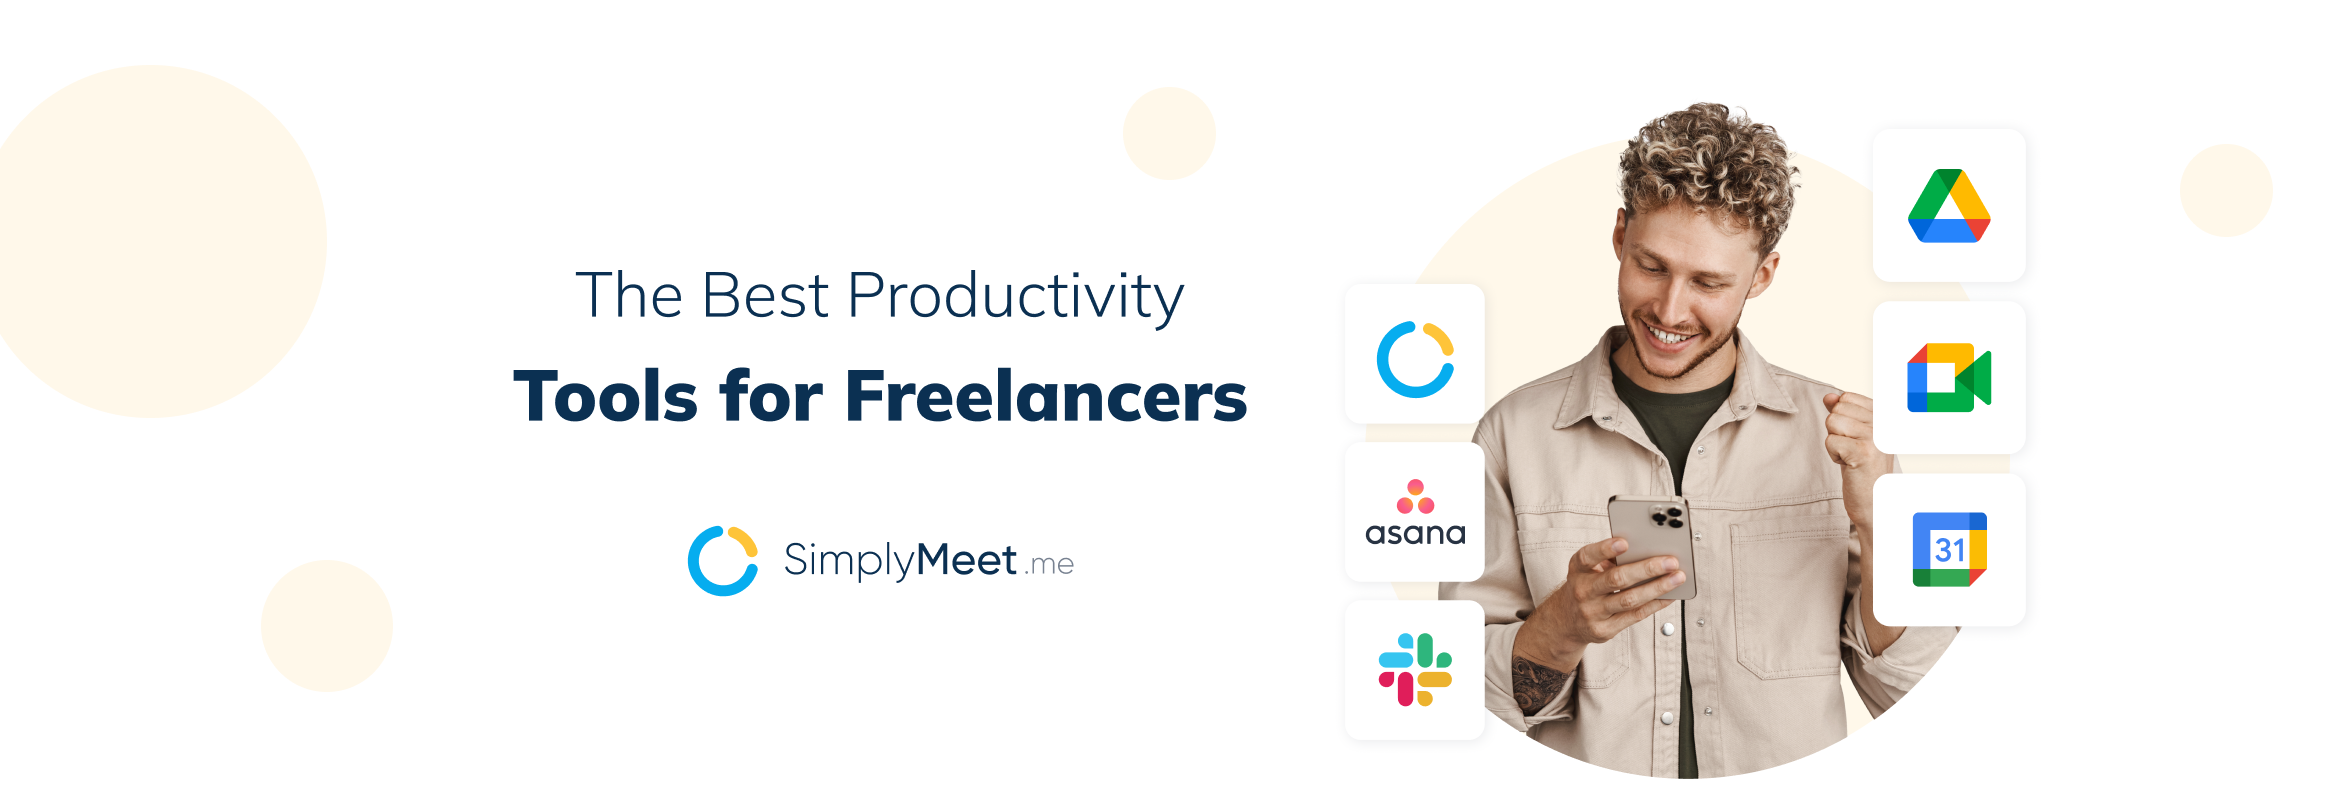 Productivity Tools for Freelancers